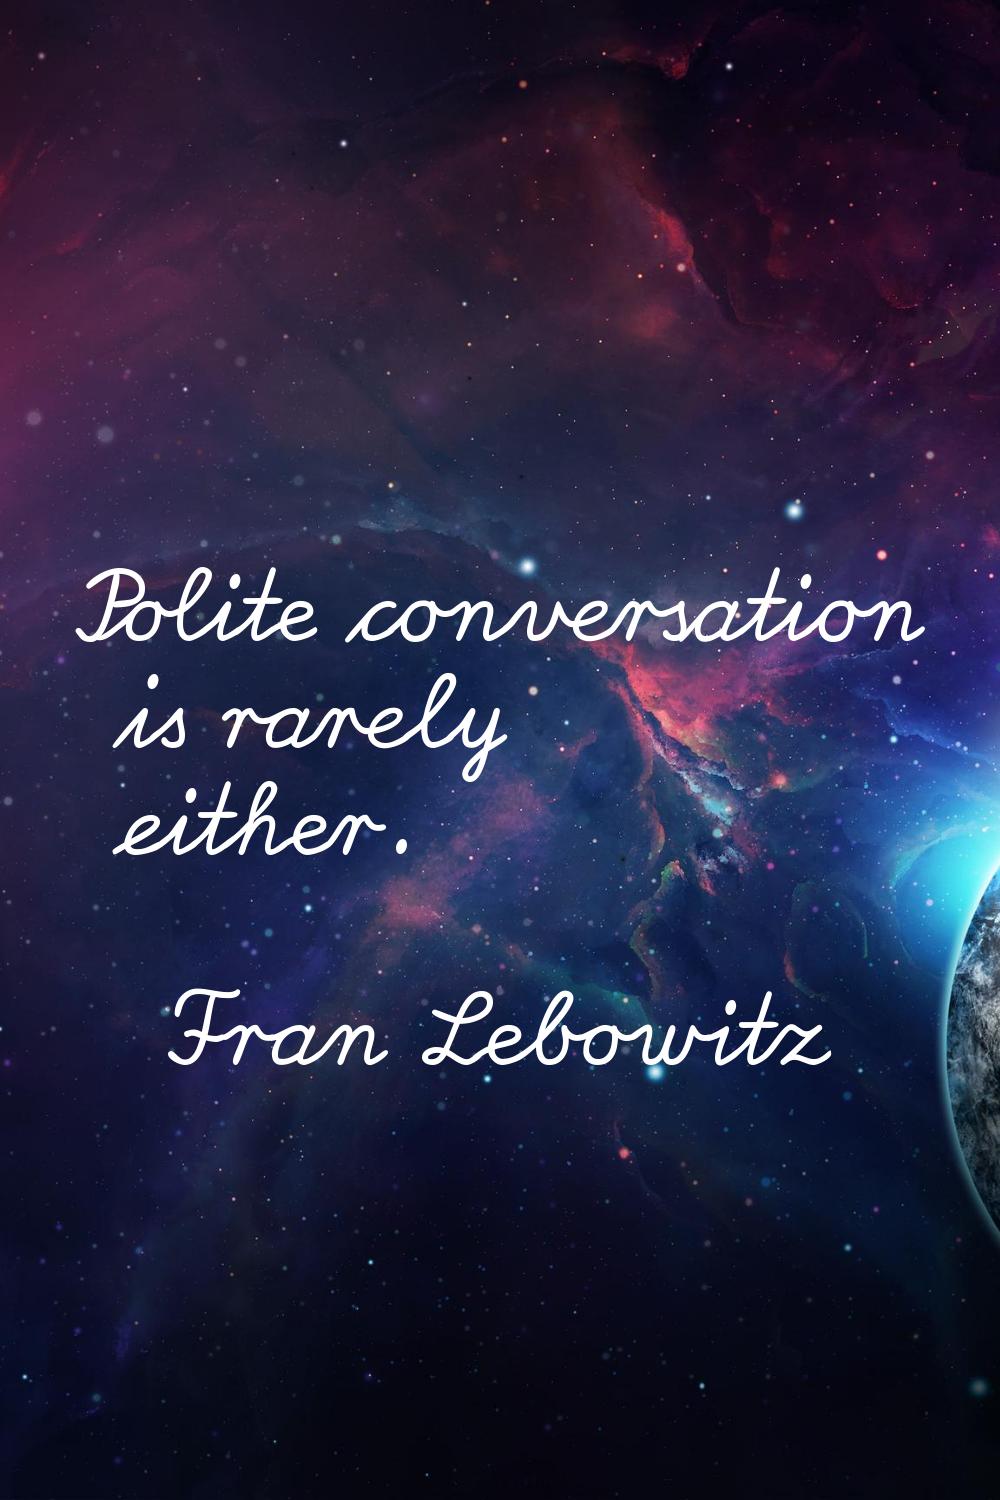 Polite conversation is rarely either.